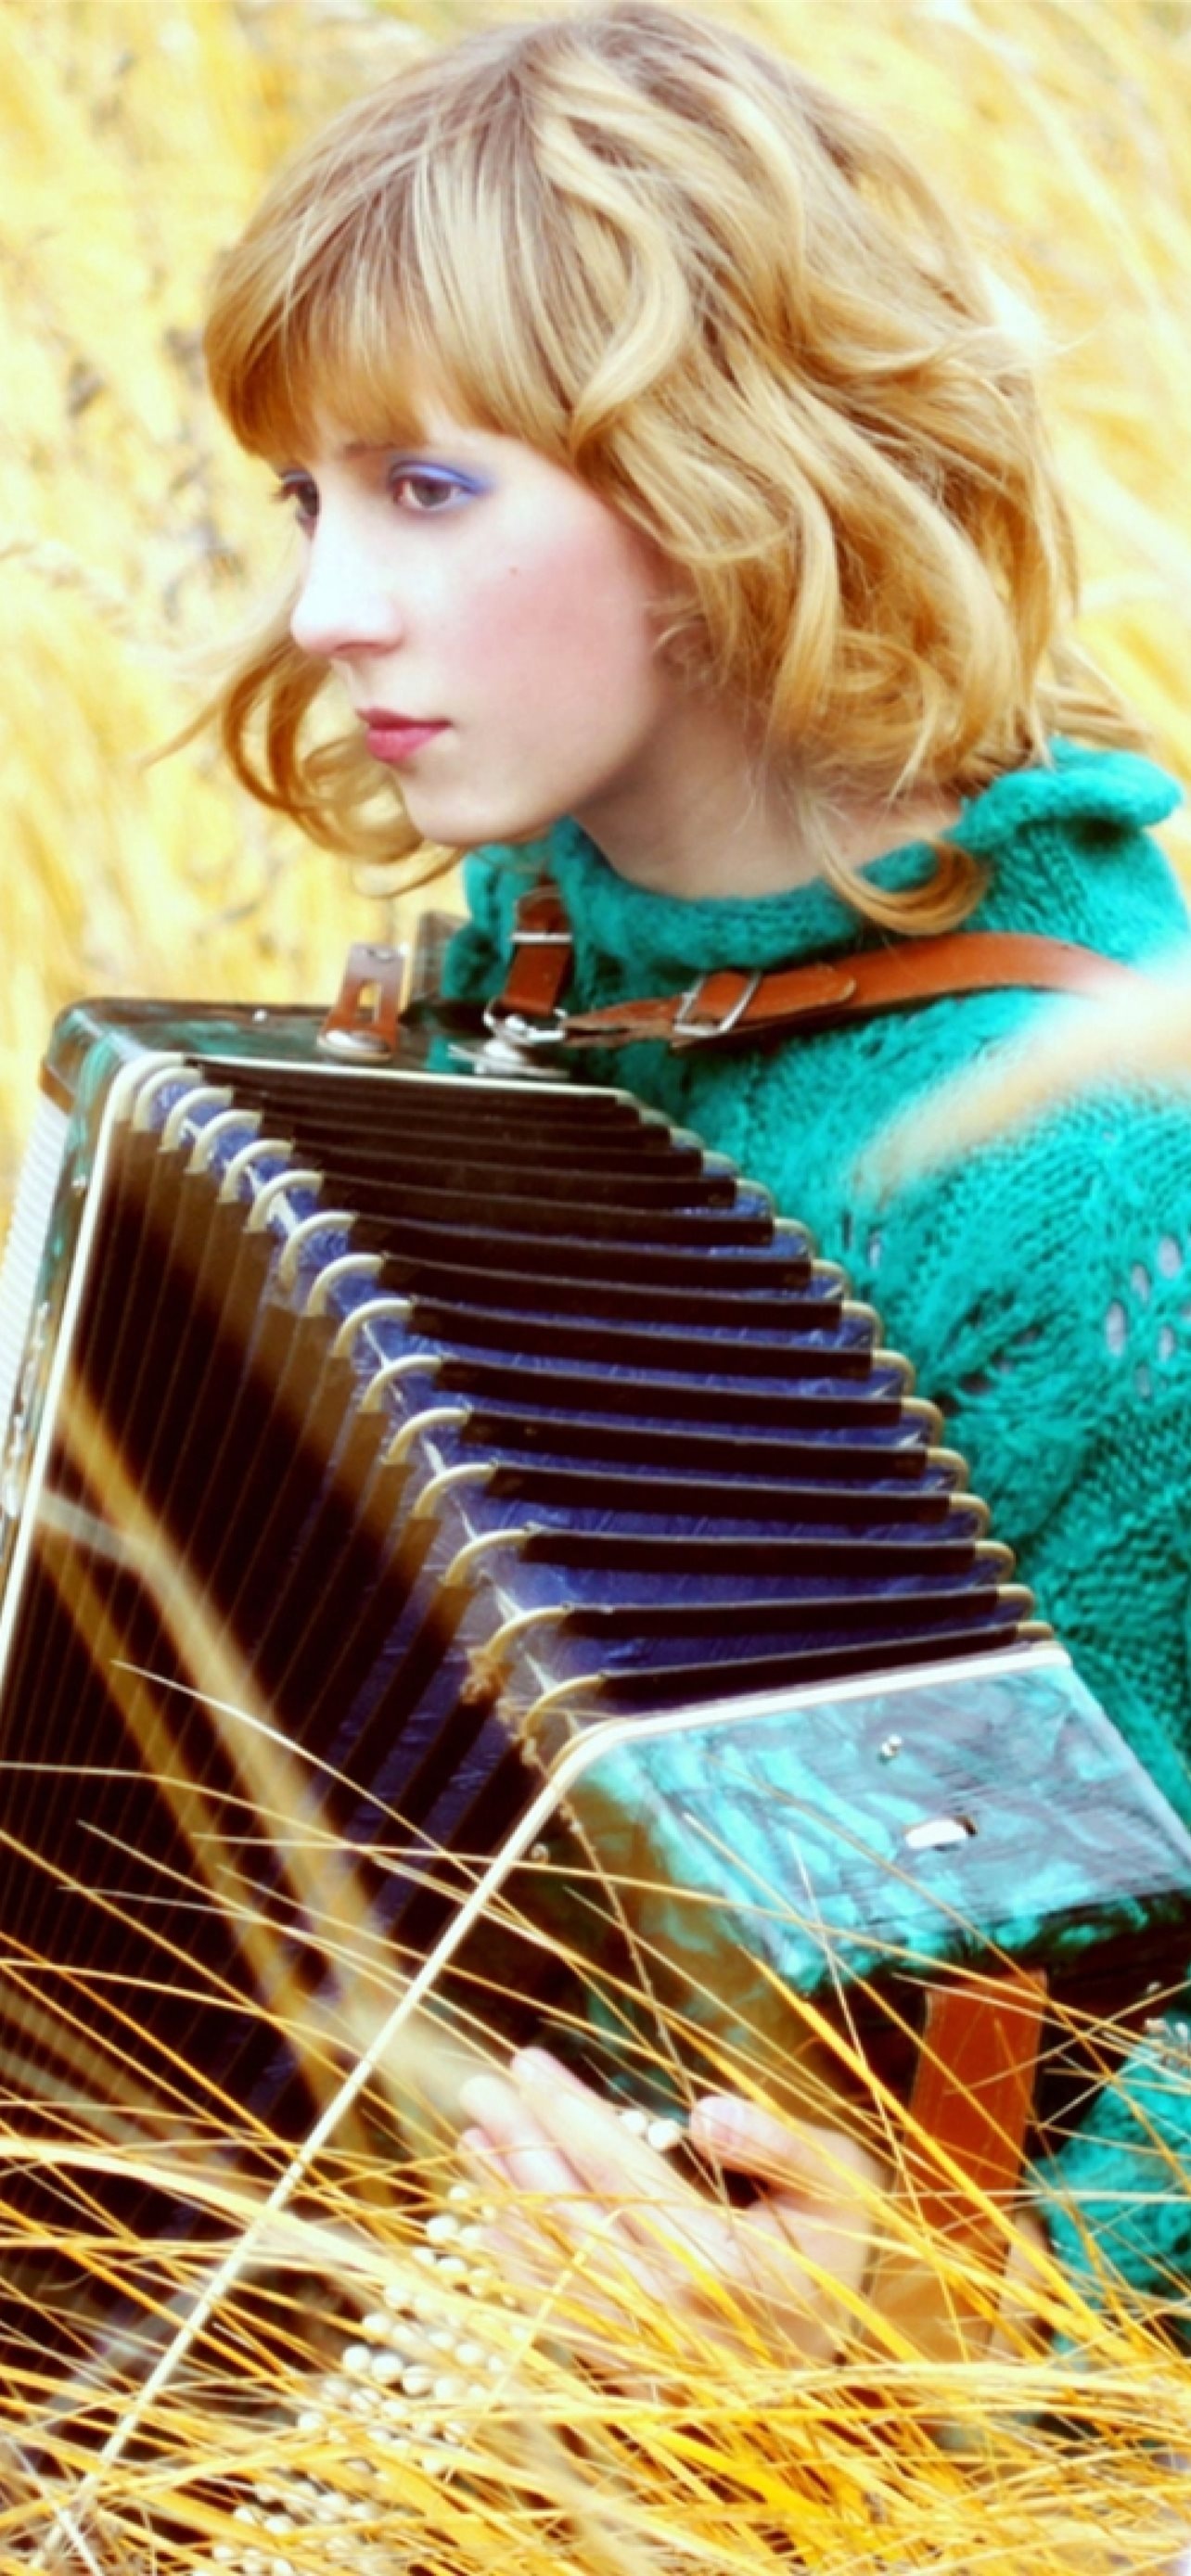 Accordion: Playing technique, Compressing or expanding the bellows while pressing buttons. 1290x2780 HD Wallpaper.